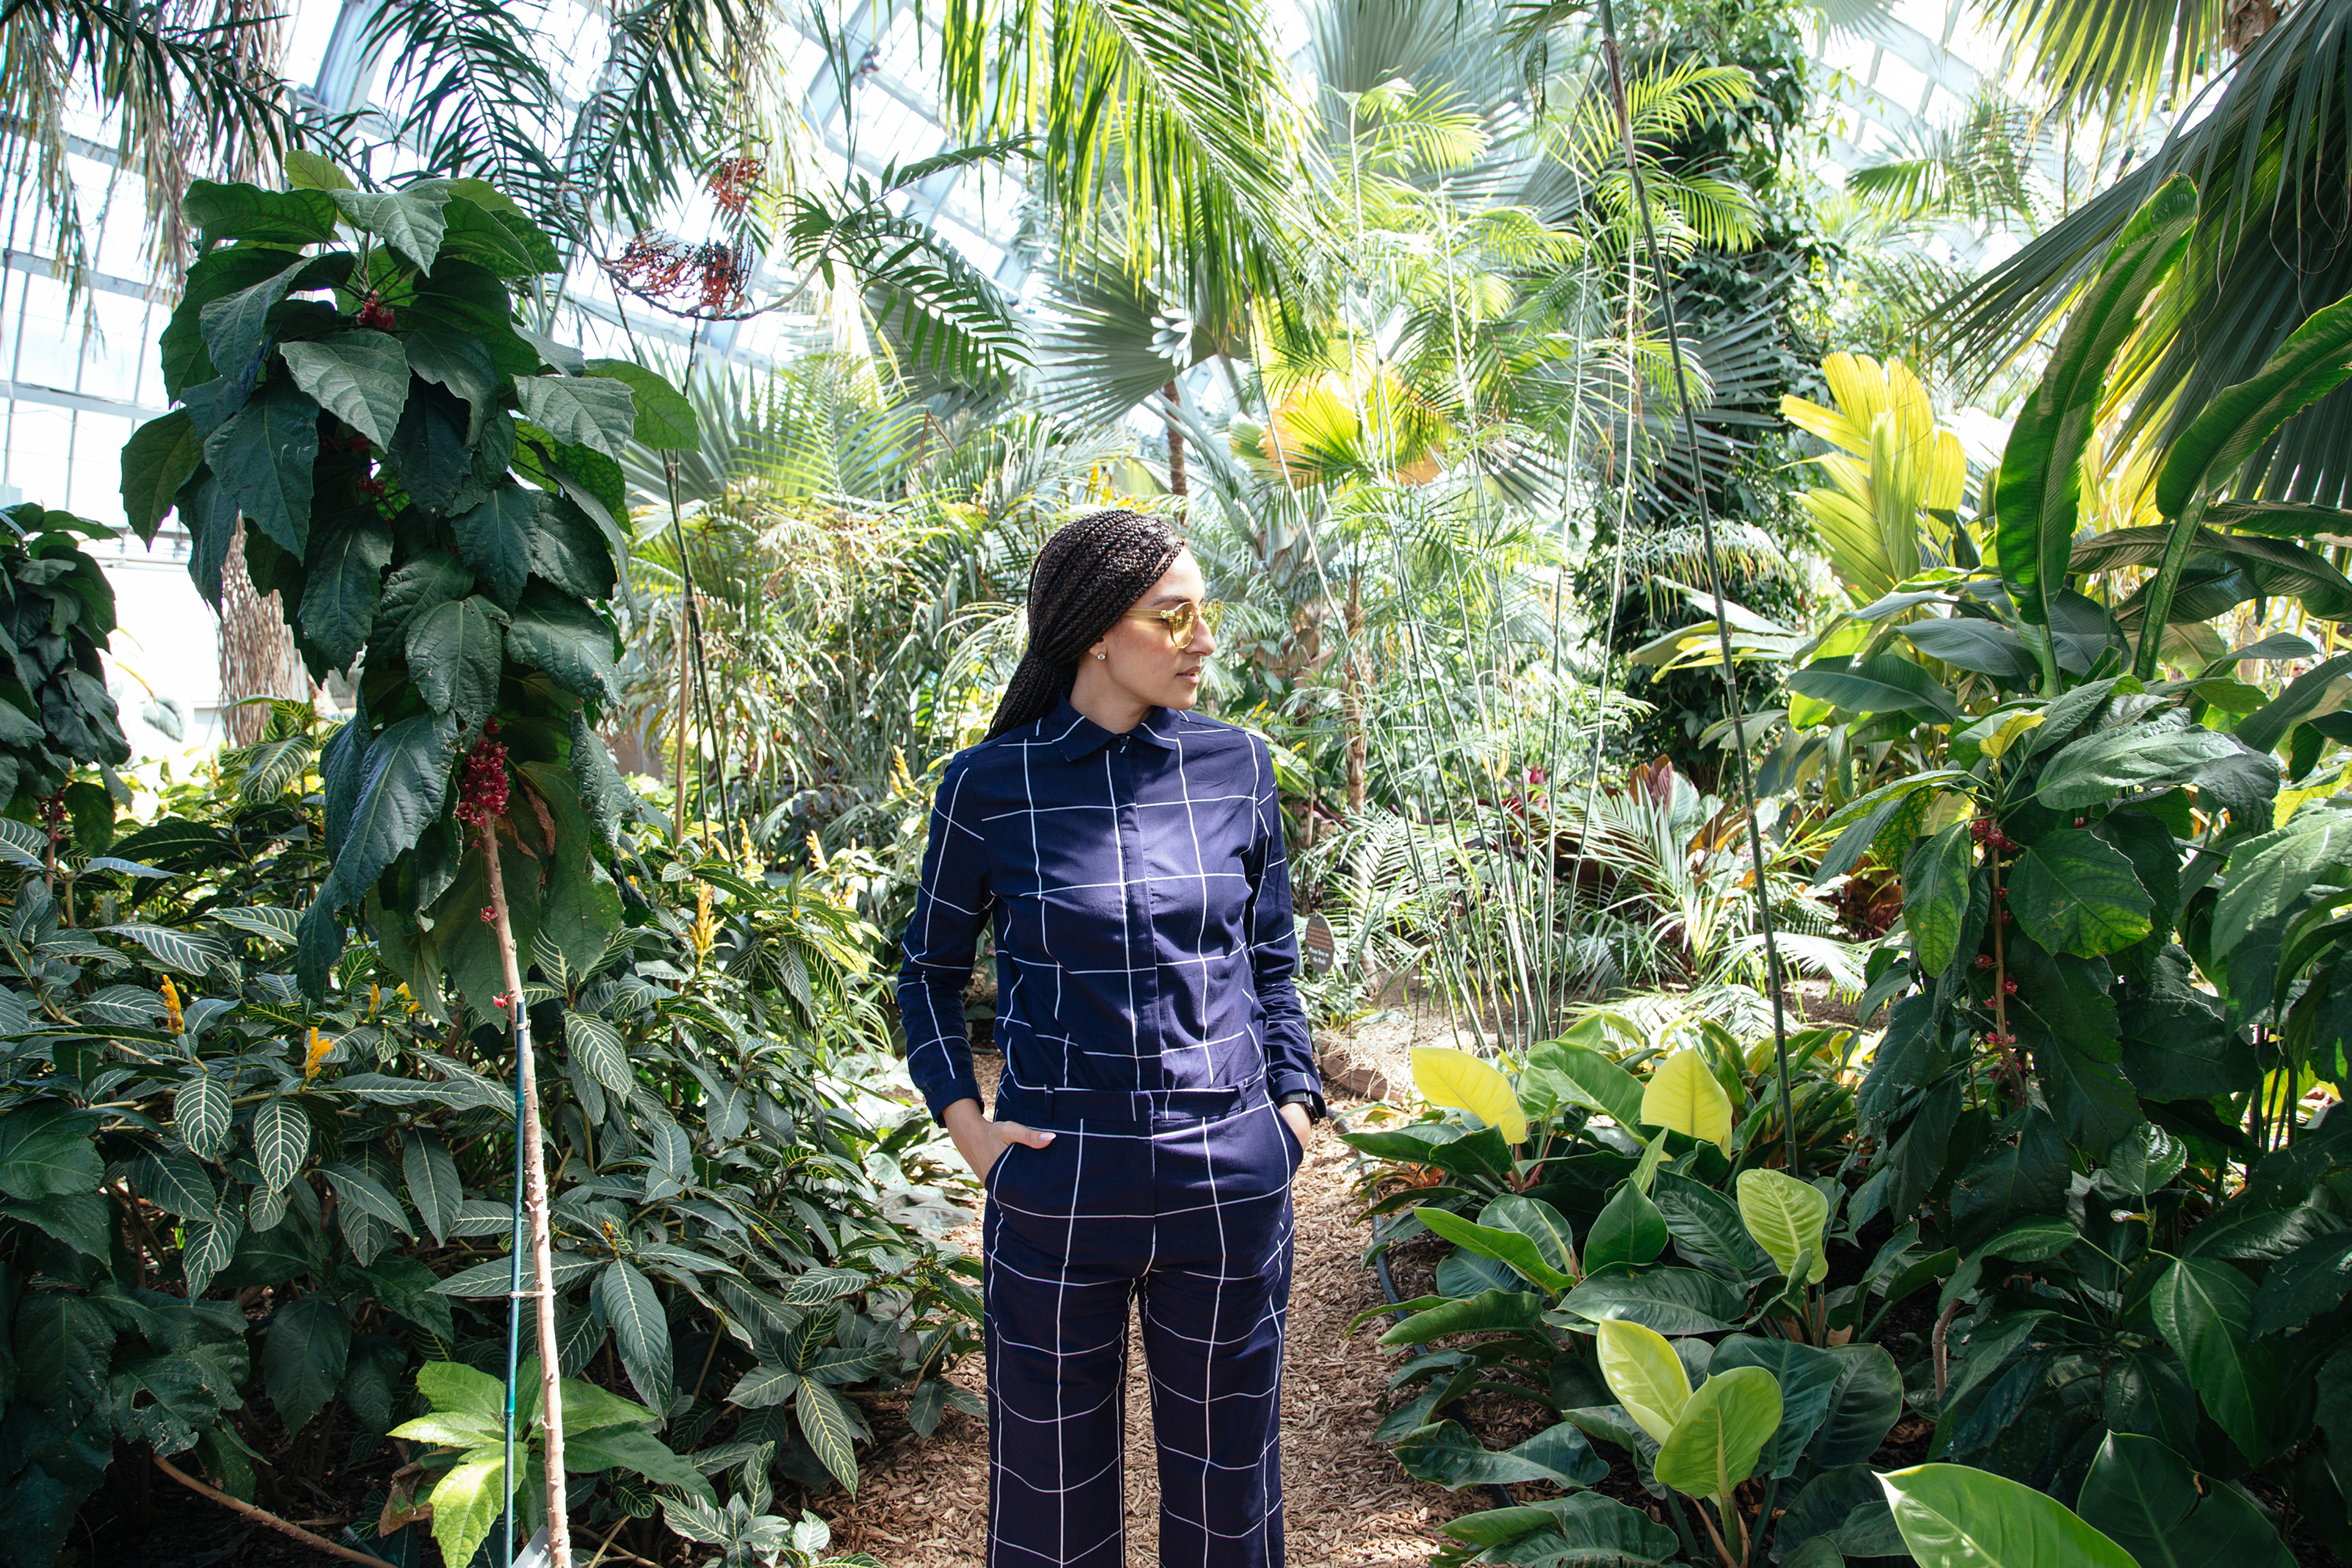 Deana Haggag of United States Artists at the Garfield Park Conservatory in Chicago. Portrait by Naima Green. 